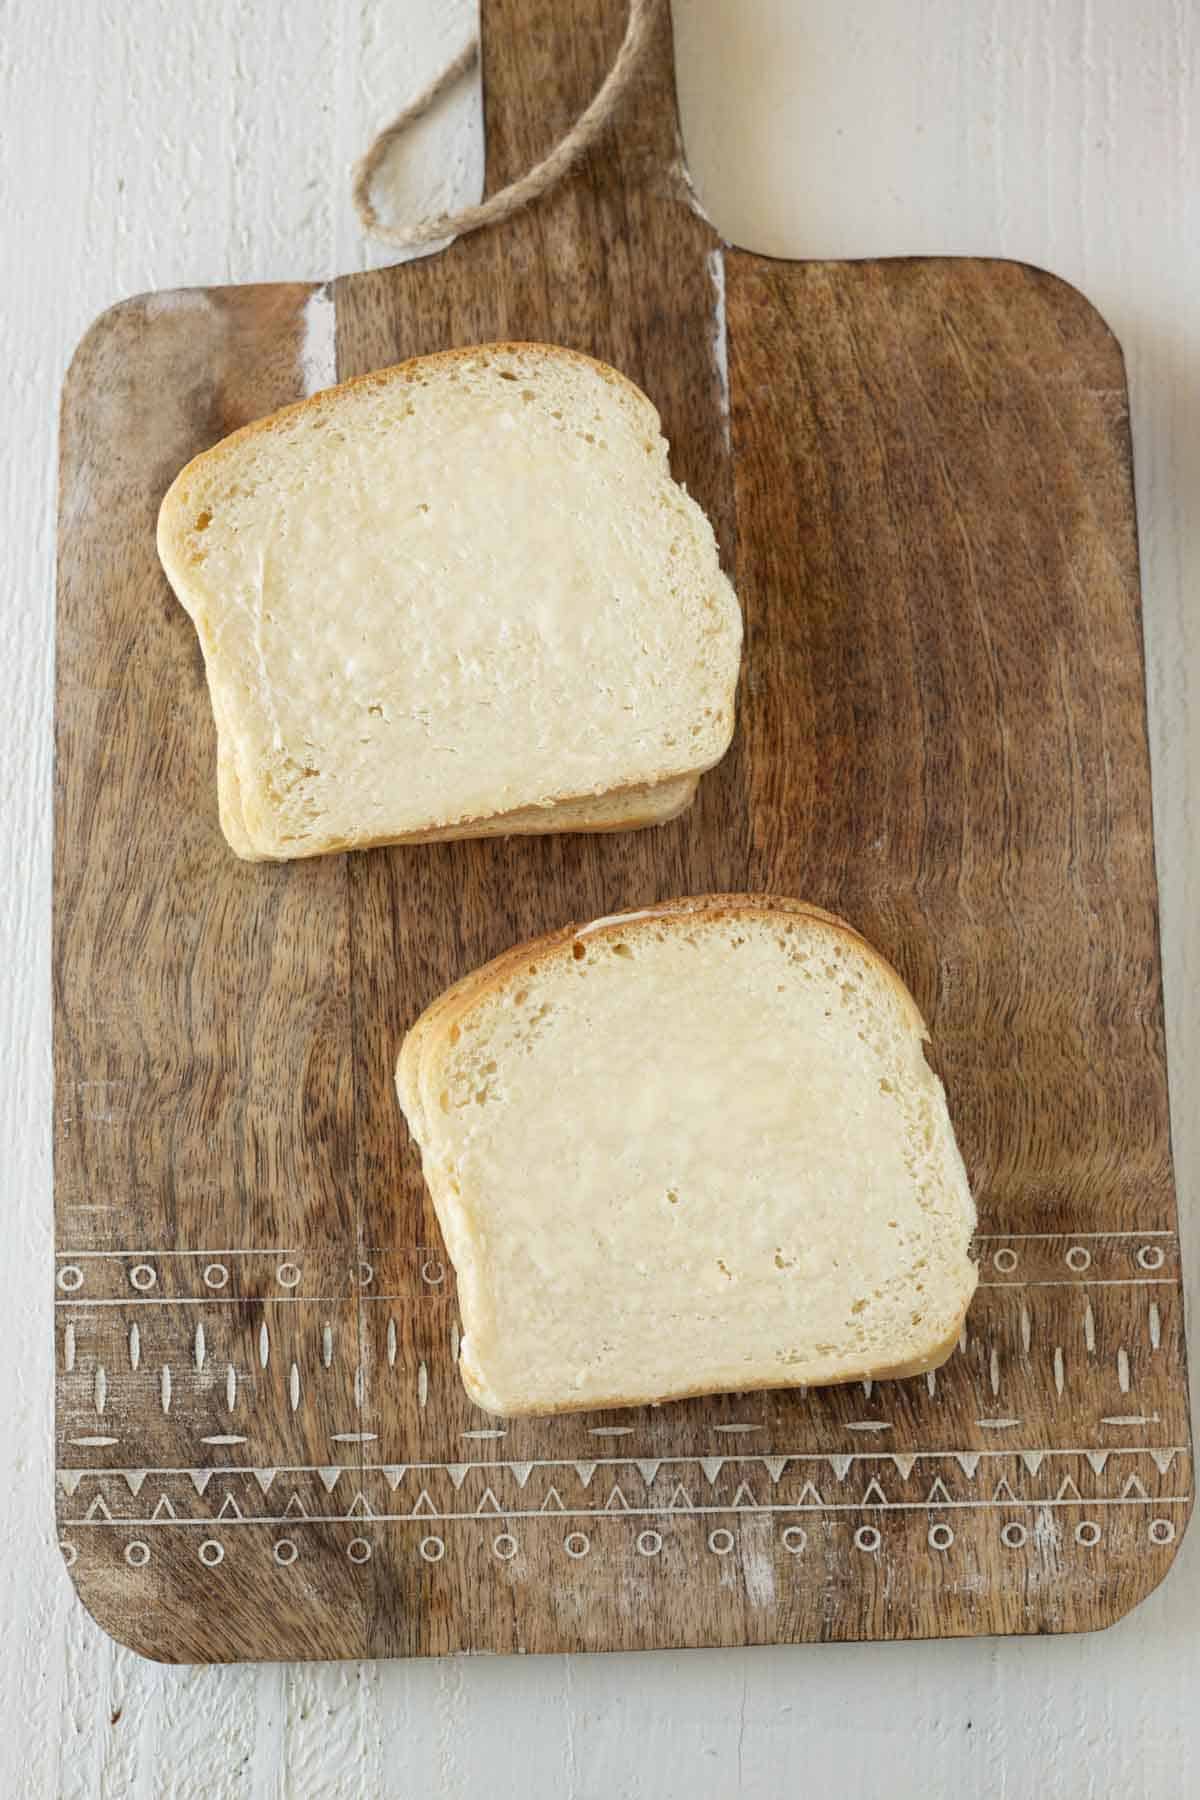 Buttered slices of white bread.